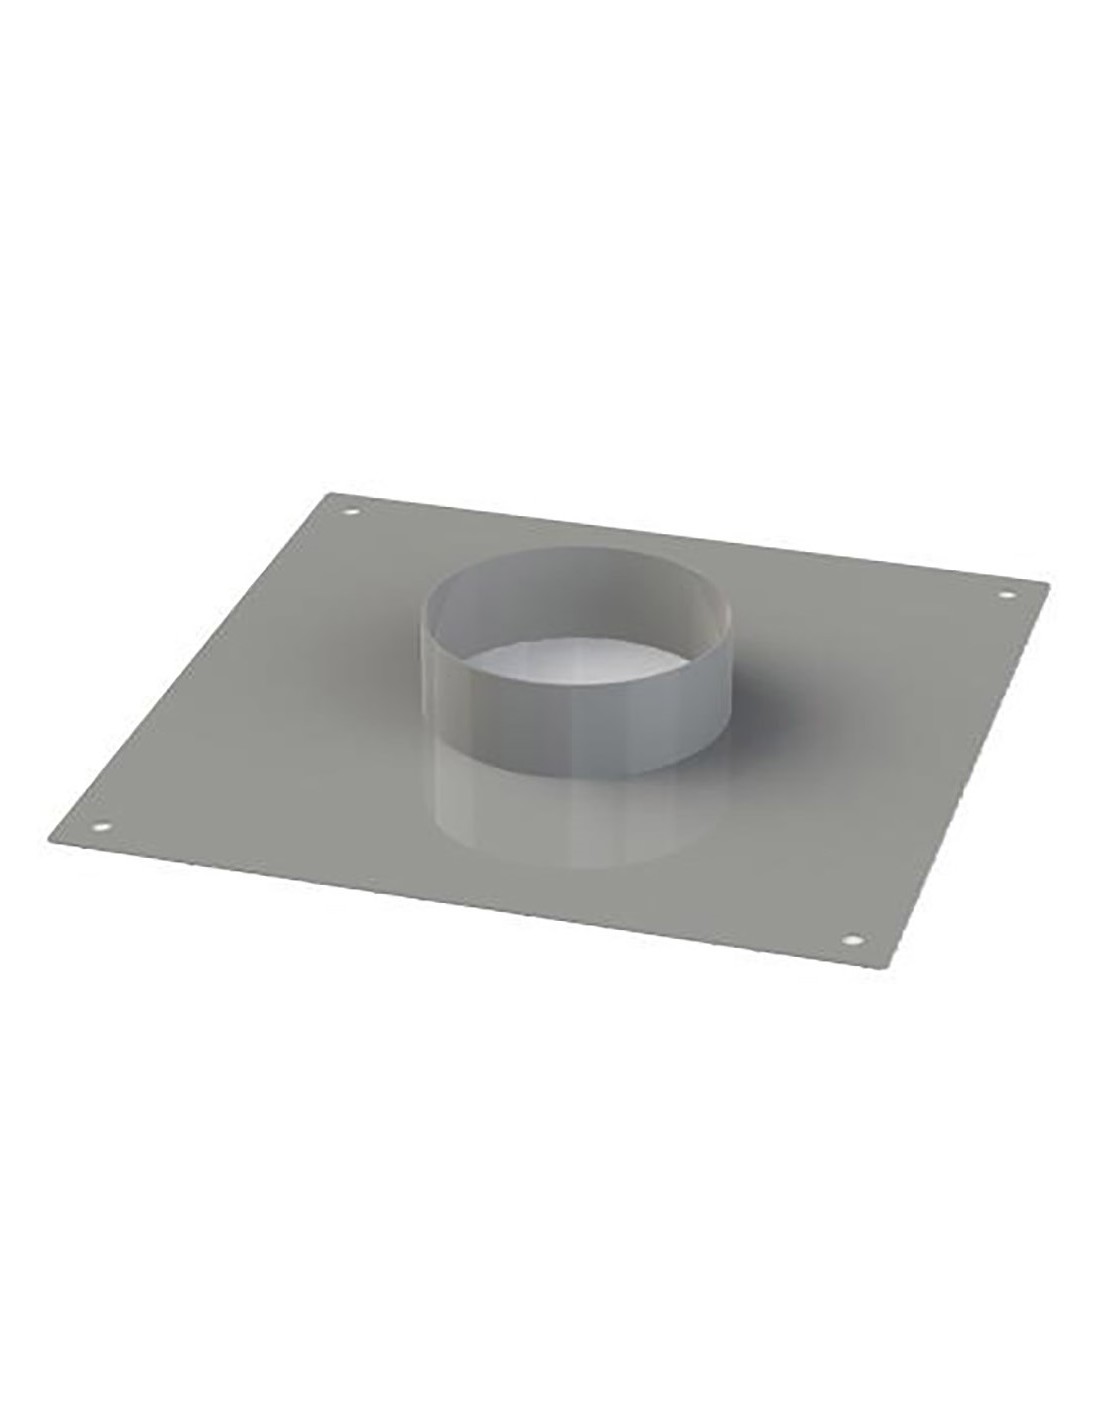 Collar plate for ocita hood 35 x 35 - Stainless steel - From Ø 32 to Ø 38